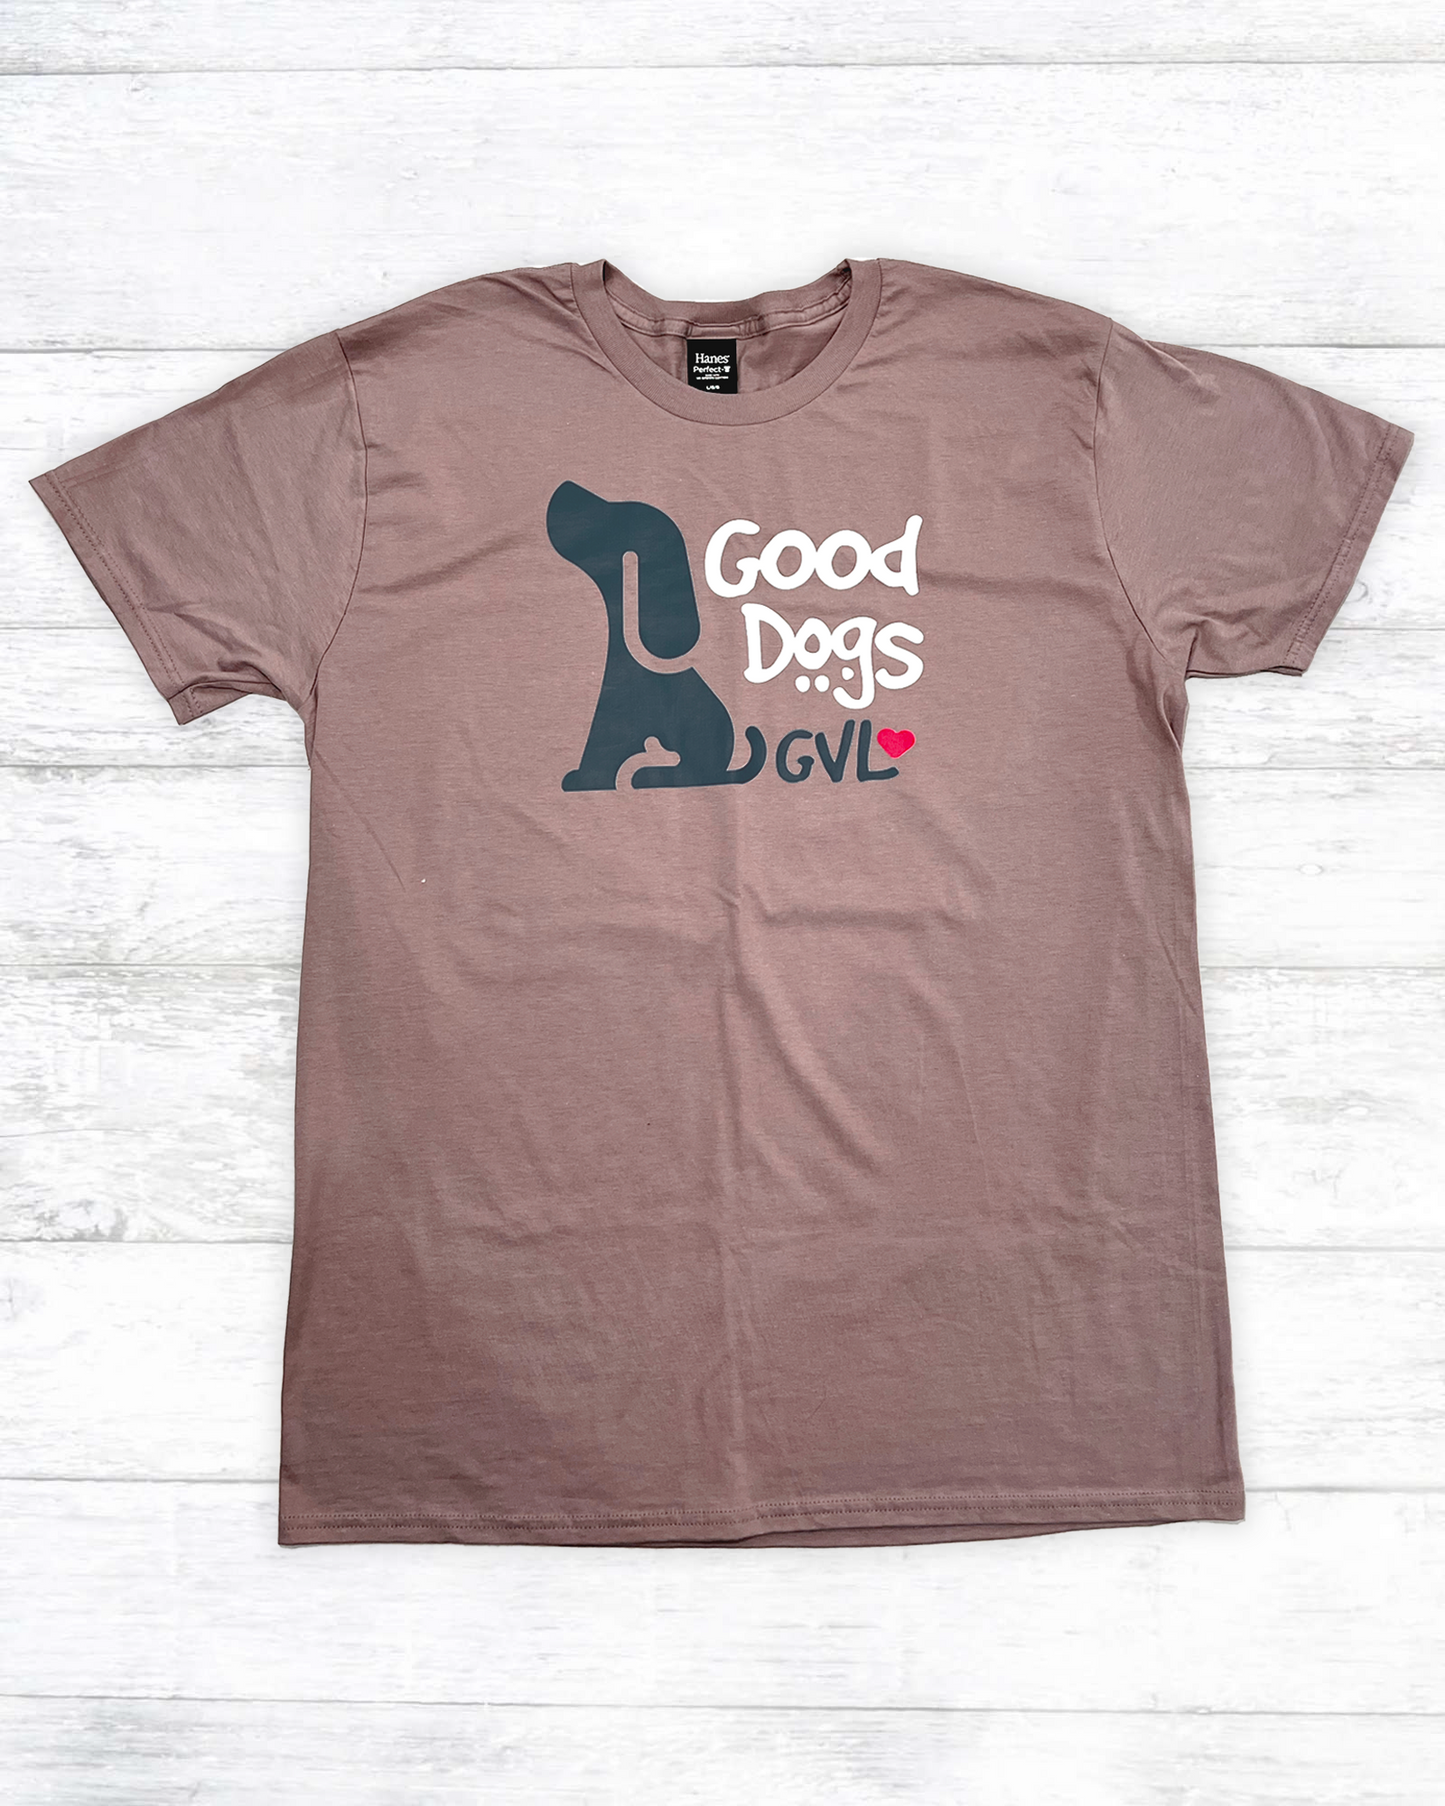 Unisex Adult Good Dogs of Greenville Logo Tee in Iced Mocha